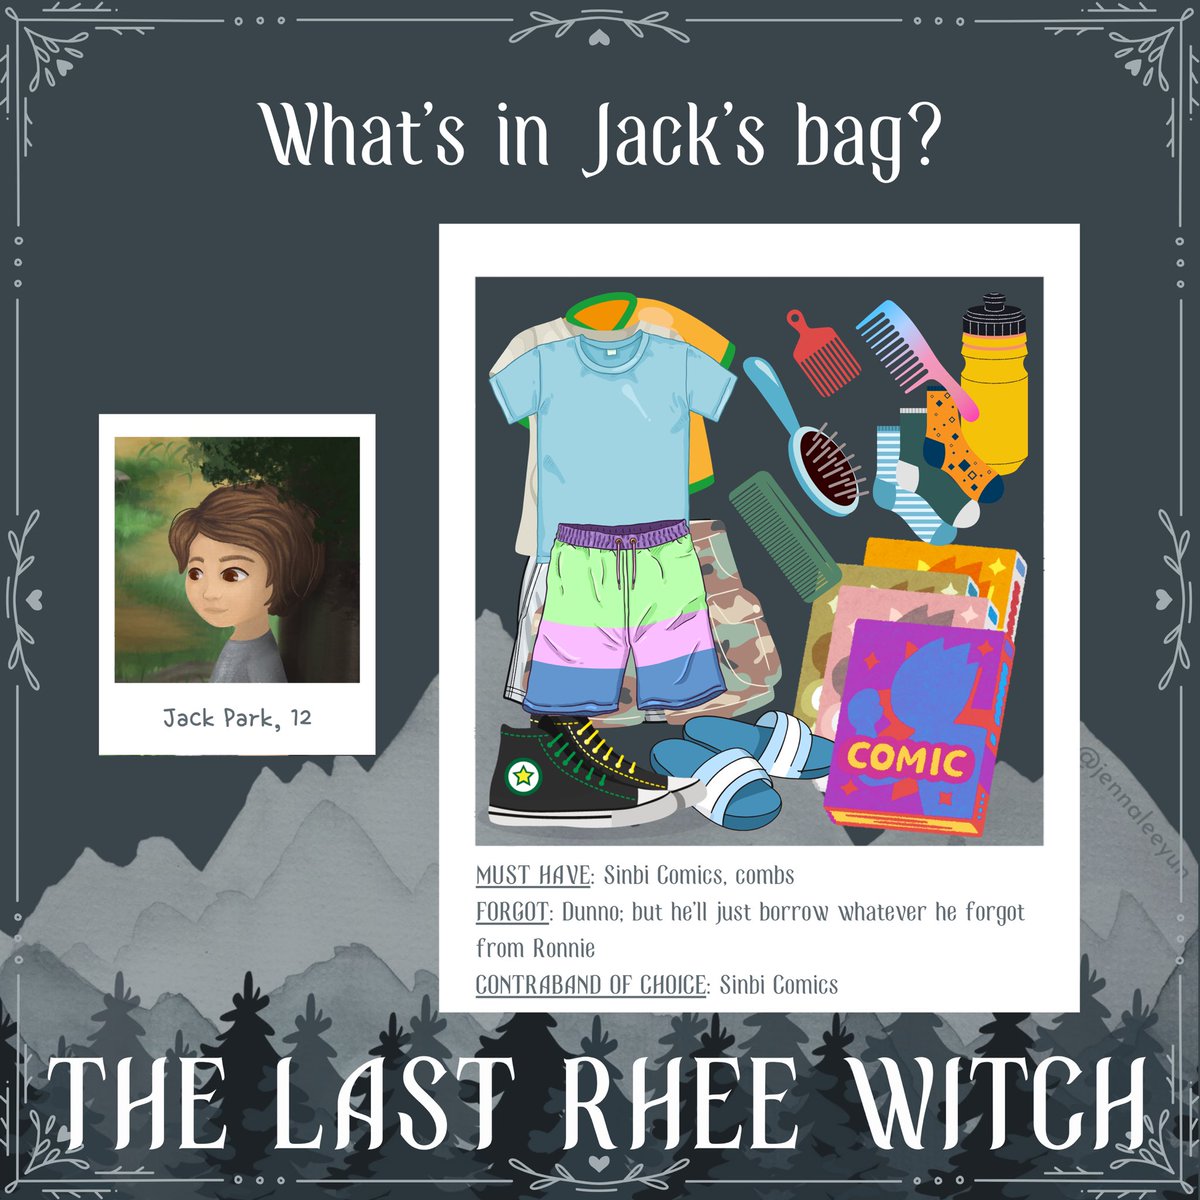 #TheLastRheeWitch is officially less than week from release!!! I’m definitely a forgetful Jack— @JamesMBlakemore’s my Ronnie and definitely (probably) packed what I forgot 😂🙈